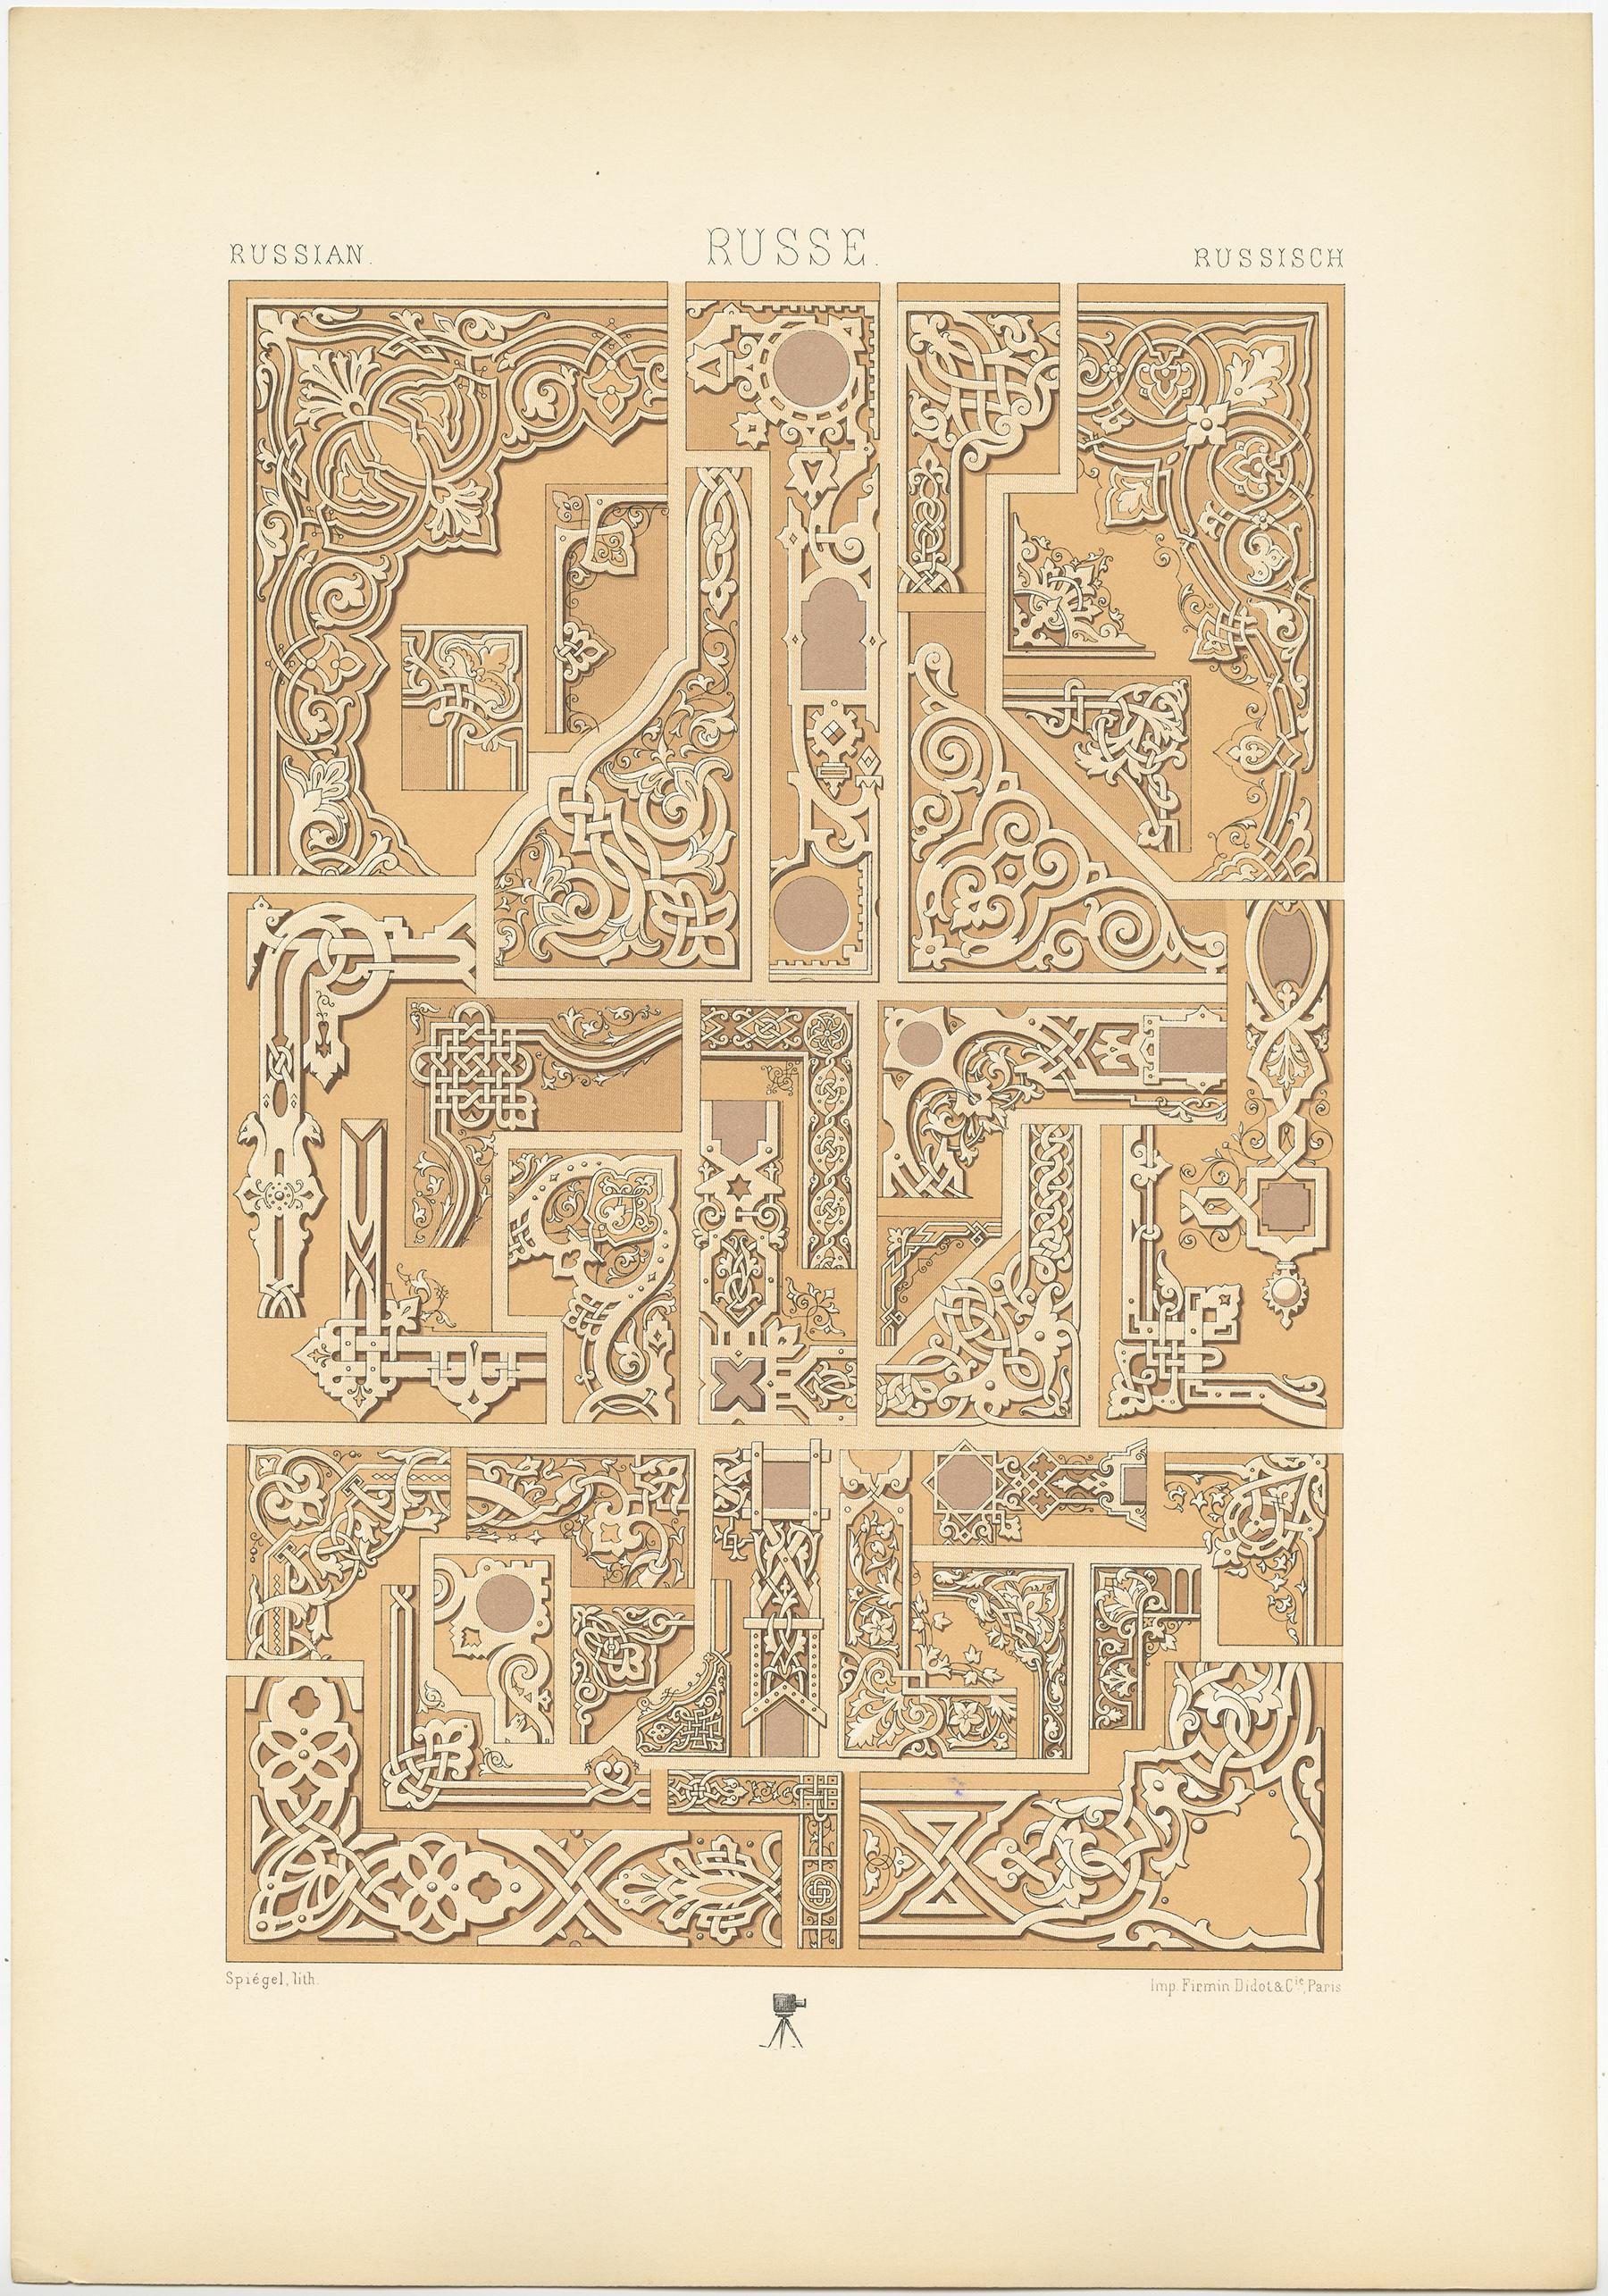 Antique print titled 'Russian - Russe - Russische'. Chromolithograph of corner motifs from metalwork design ornaments. This print originates from 'l'Ornement Polychrome' by Auguste Racinet. Published circa 1890.